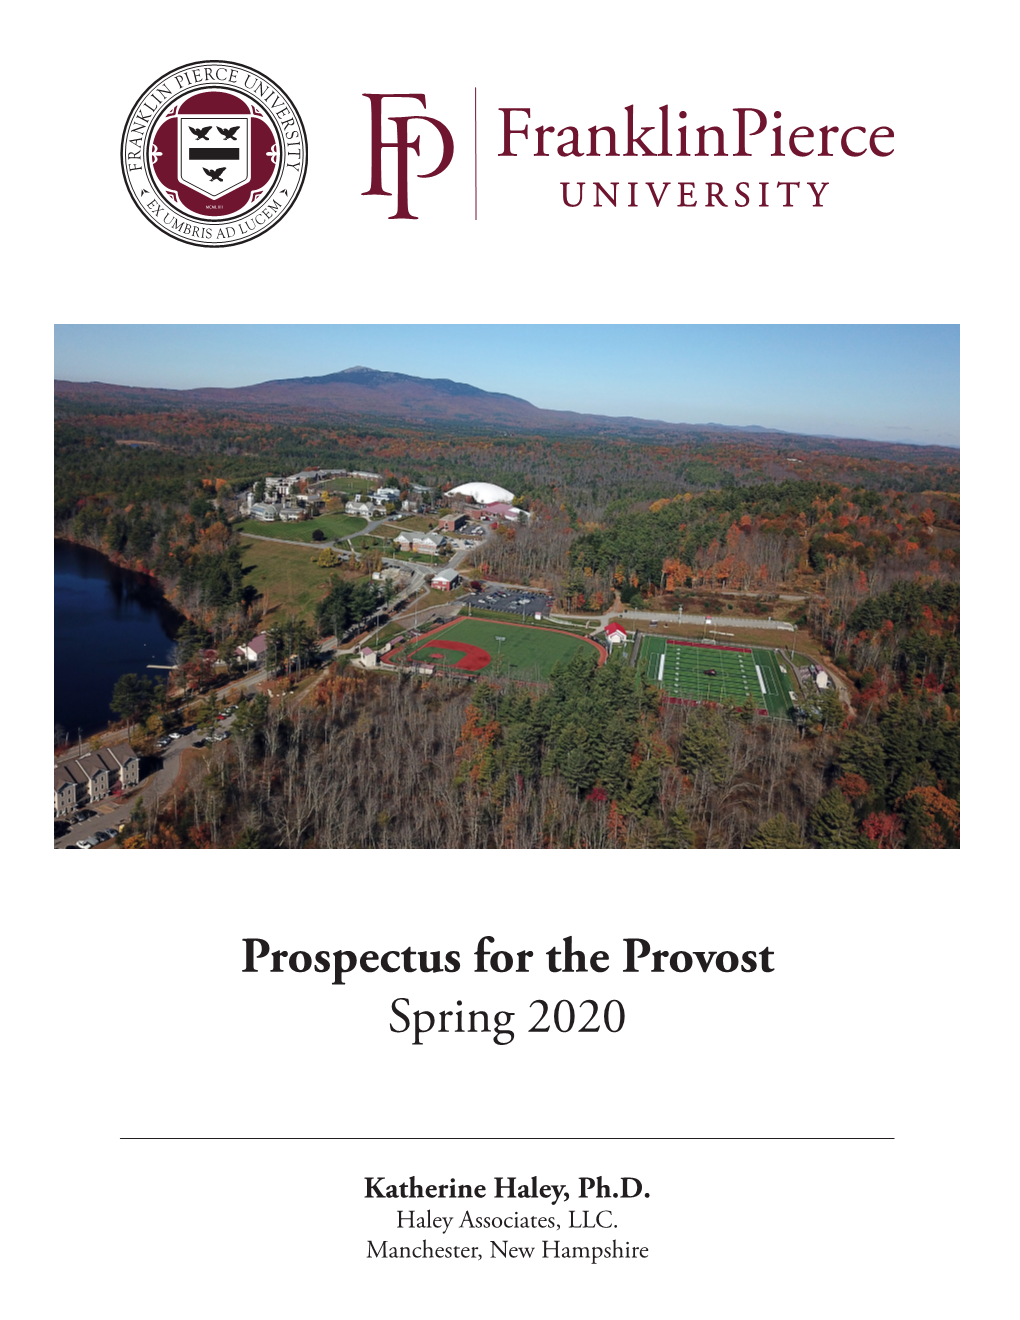 Prospectus for the Provost Spring 2020